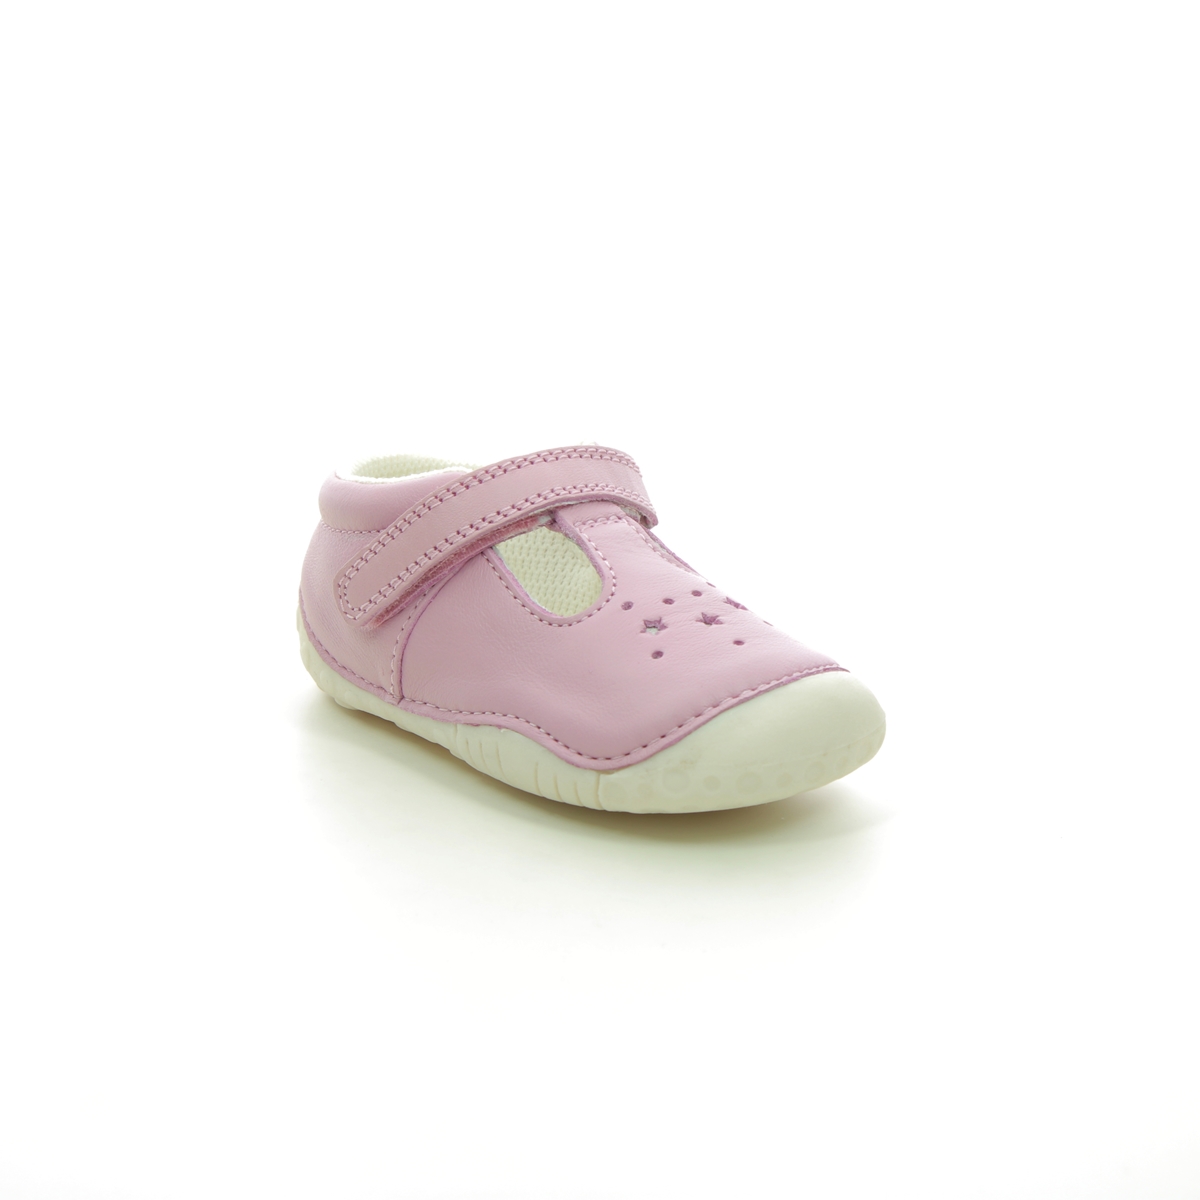 Start Rite - Tumble T Bar In Pink Leather 0761-67G In Size 2.5 In Plain Pink Leather First And Baby Shoes  In Pink Leather For kids